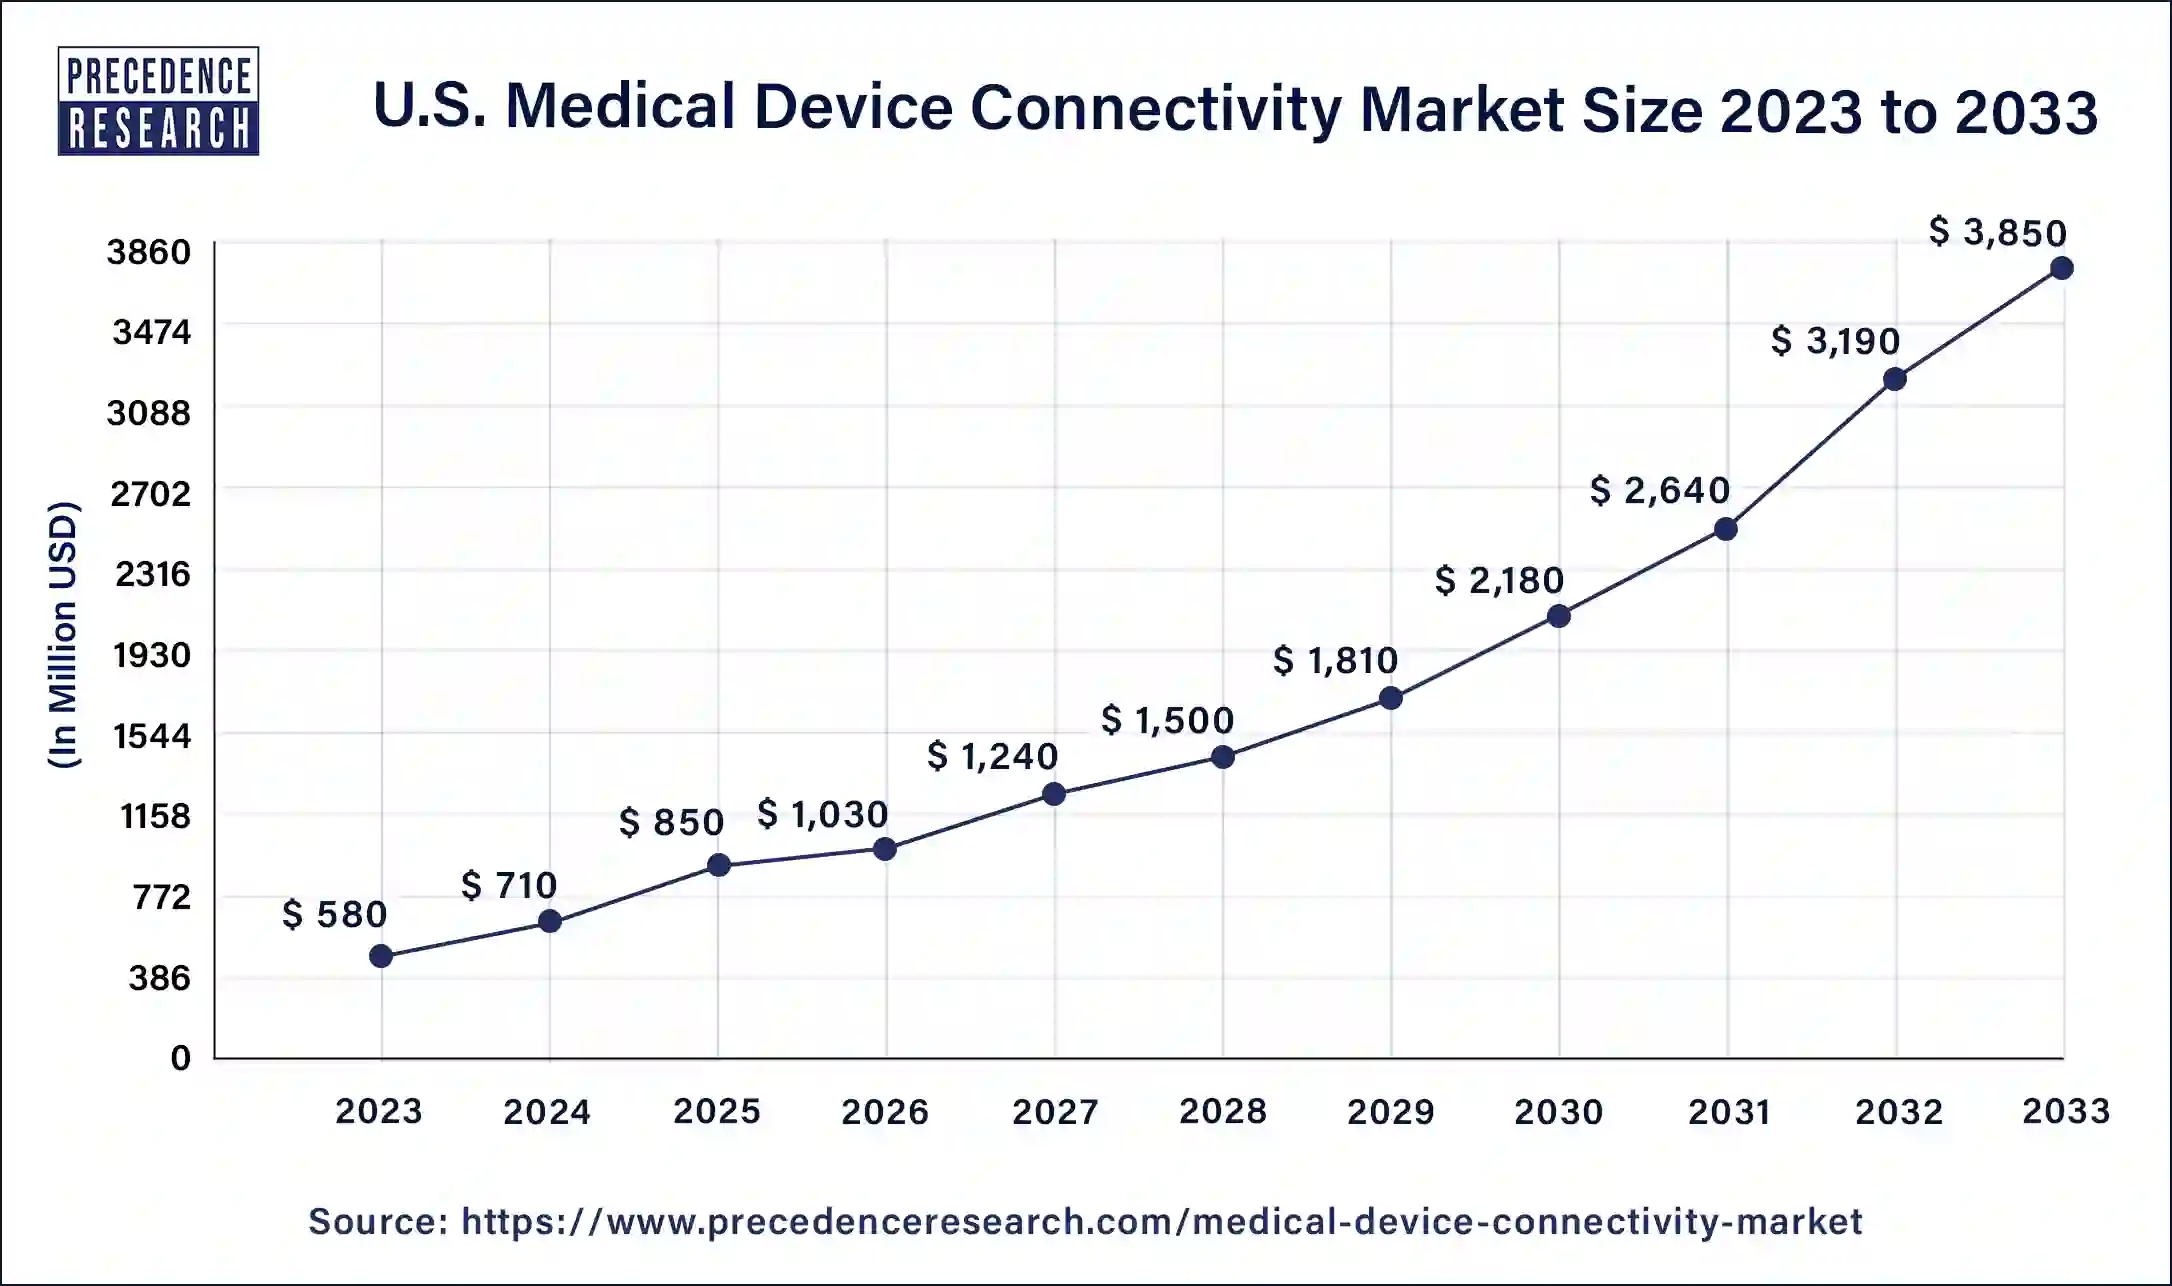 U.S. Medical Device Connectivity Market Size 2024 to 2033